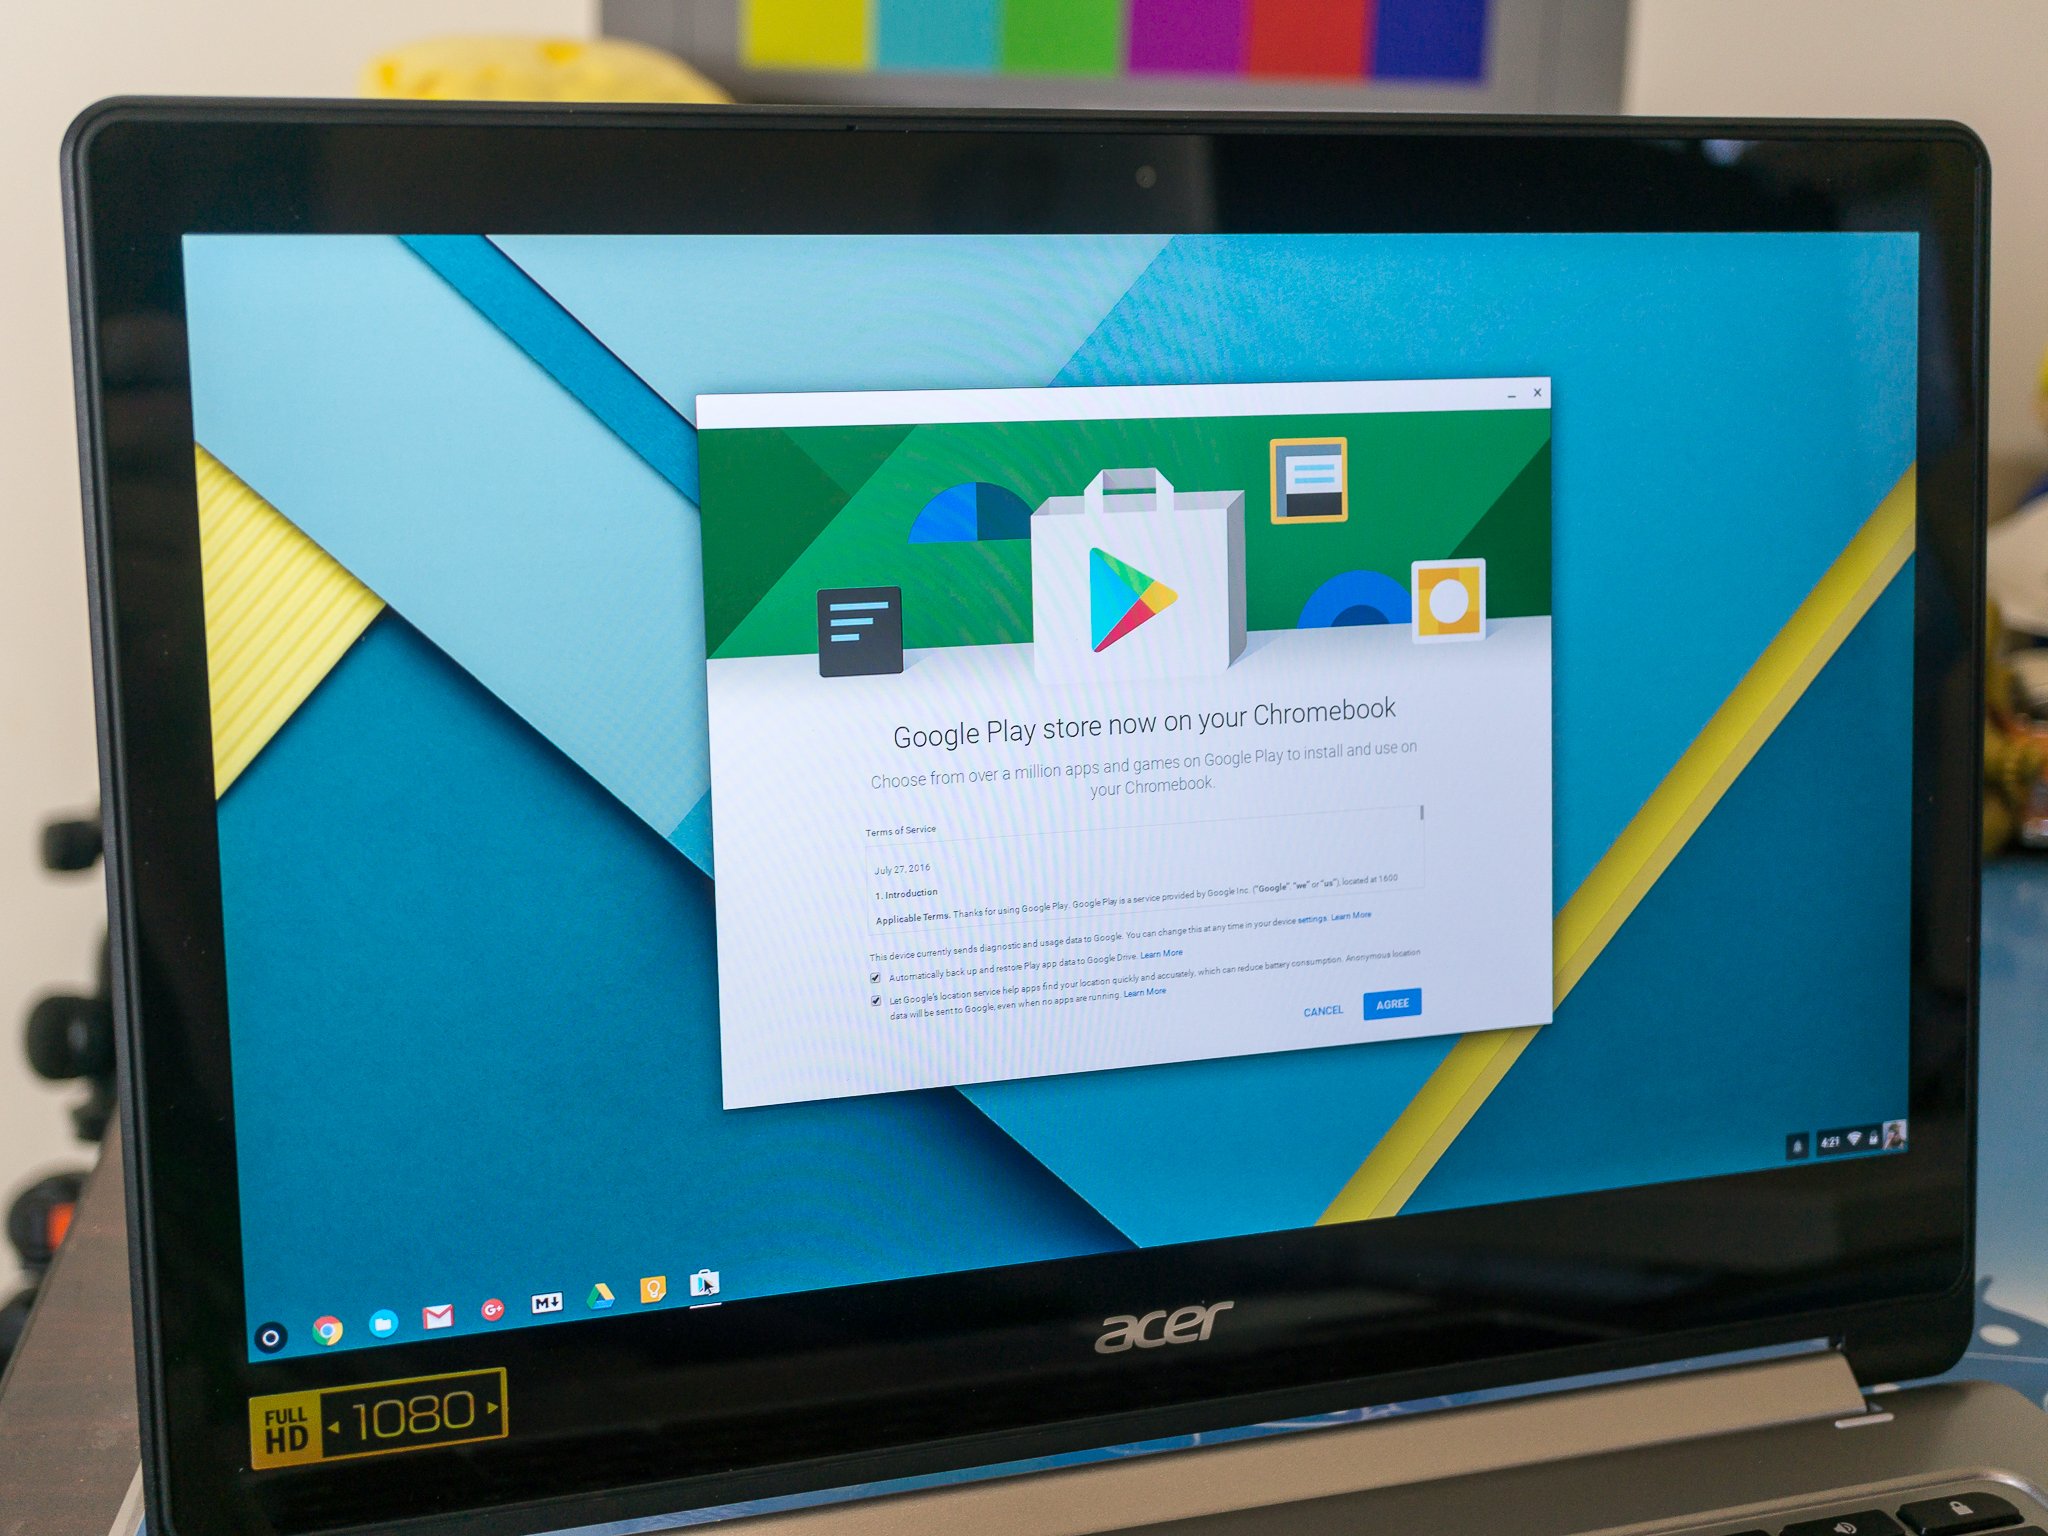 These are the Chromebooks that can run Android apps from Google Play